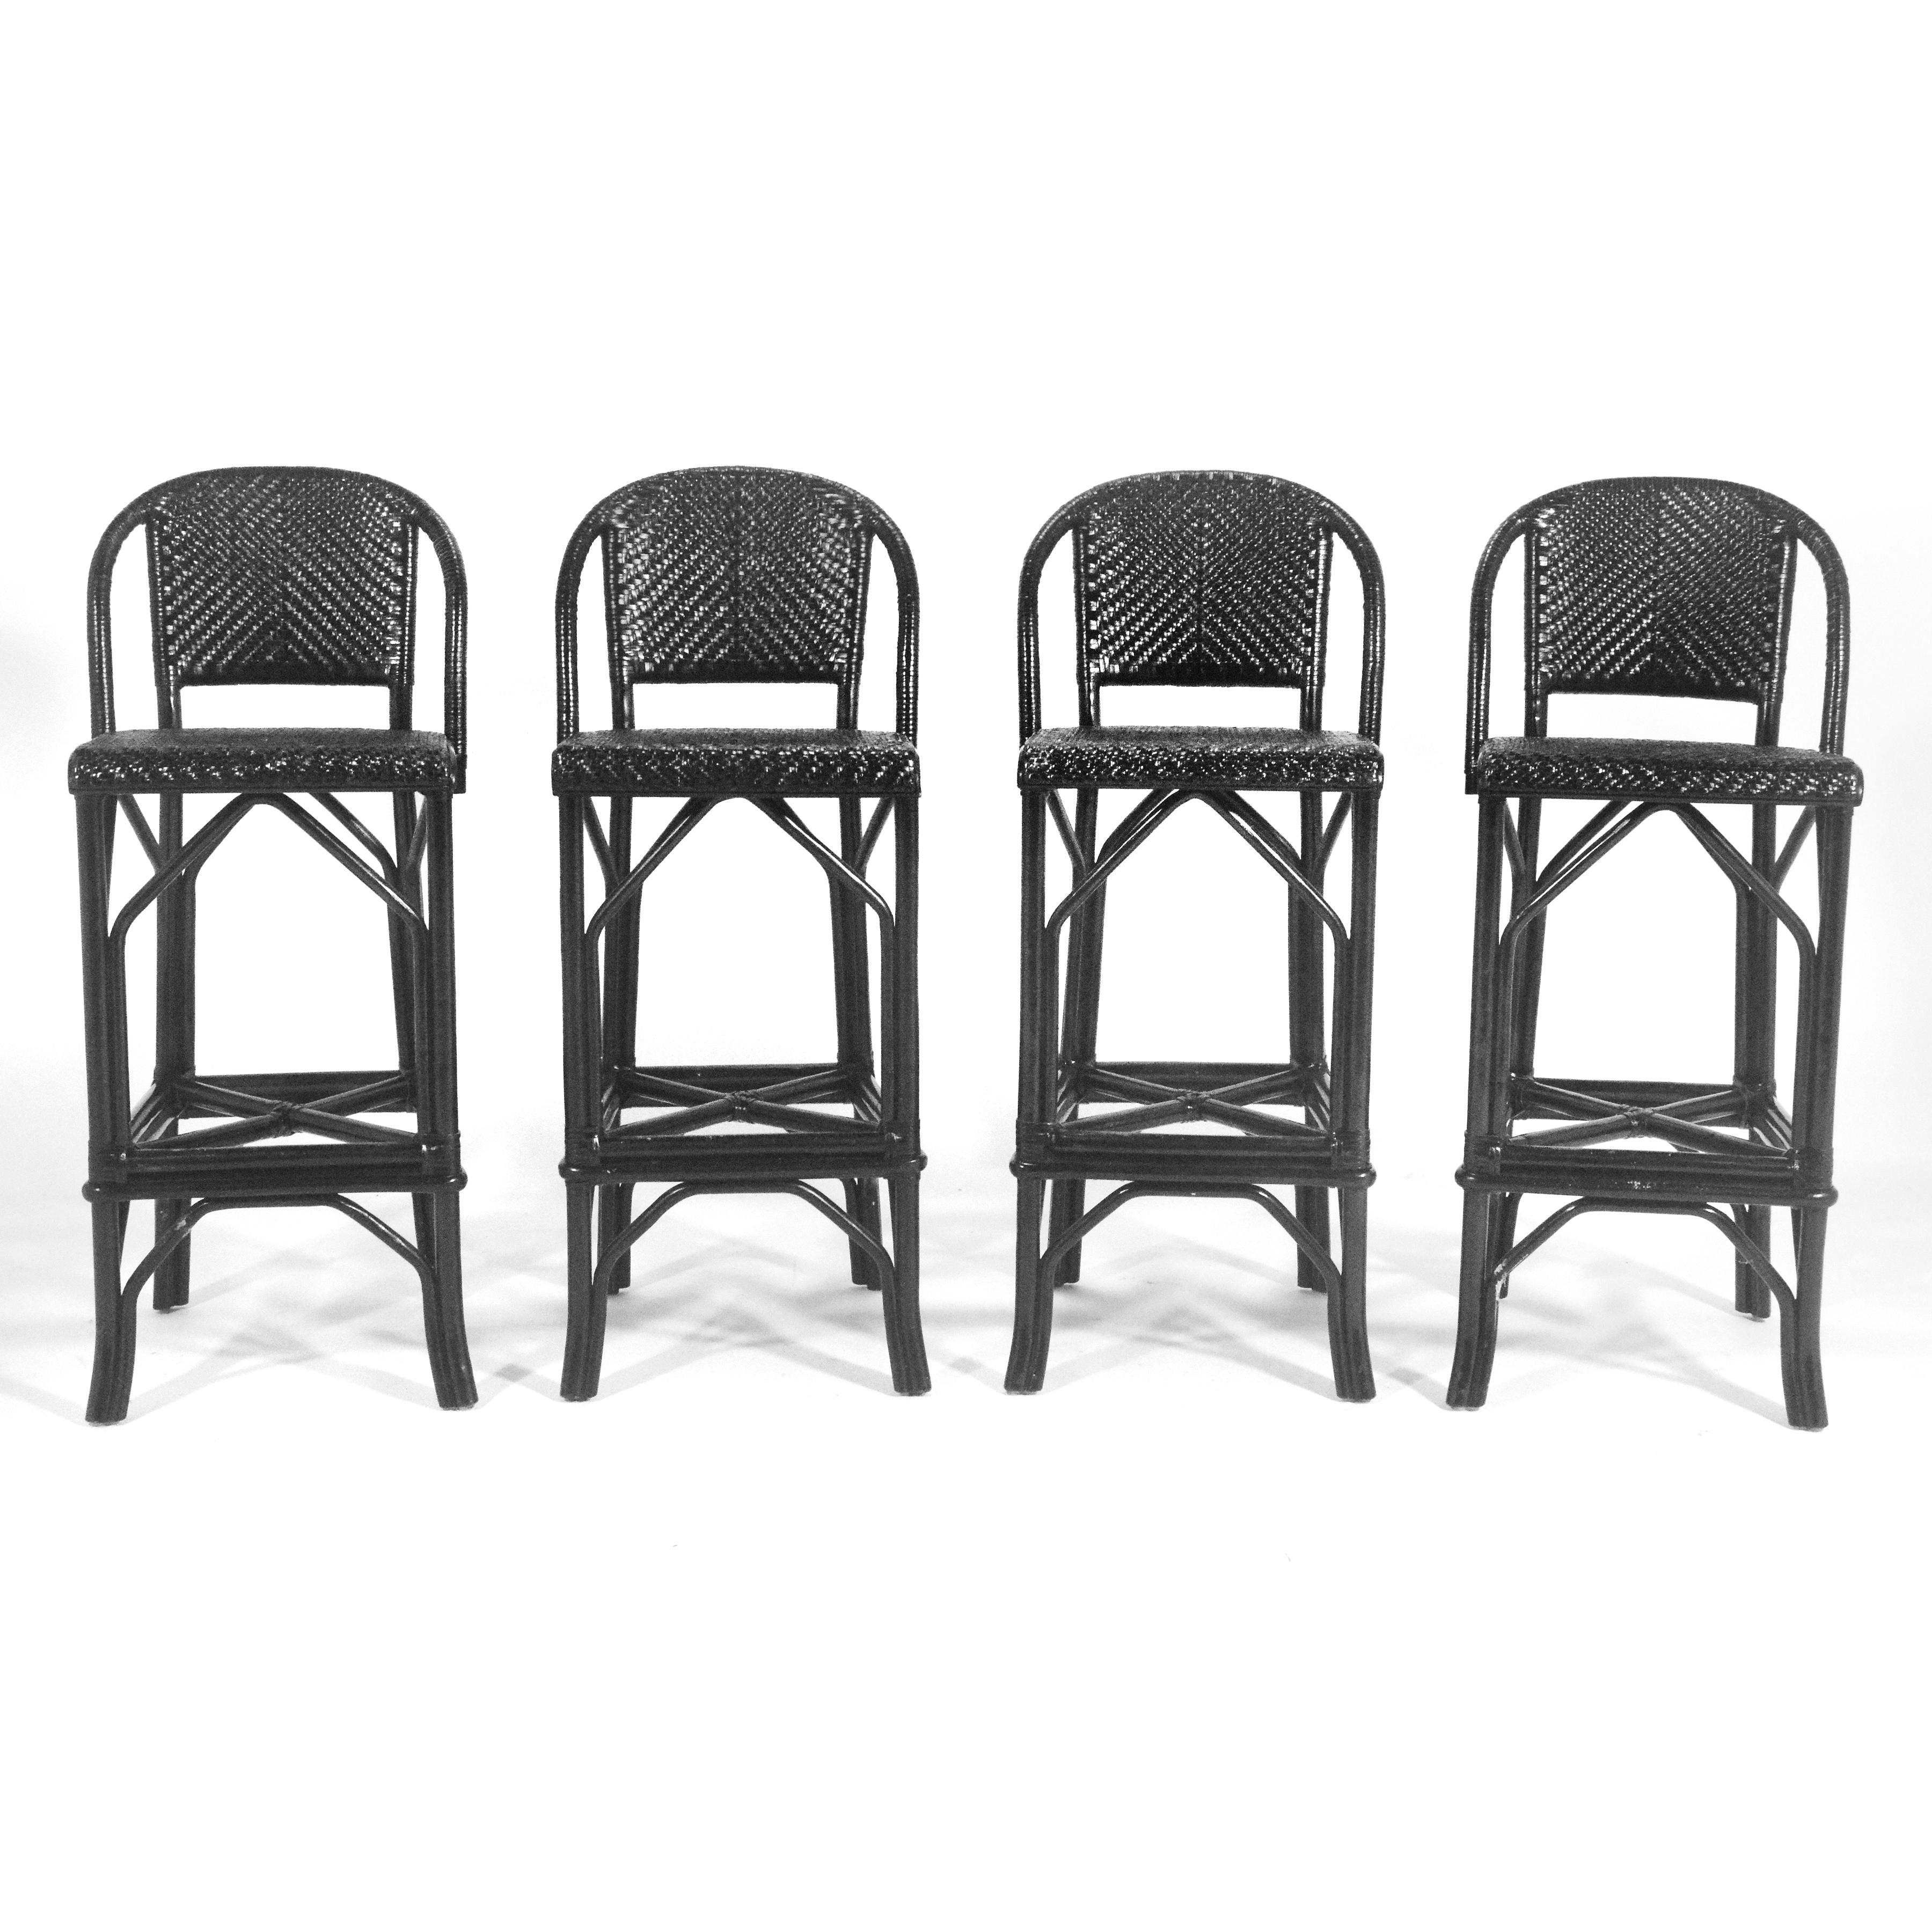 These striking and well made stools, likely by Brown Jordan, have frames of rattan that have leather bindings at the joints and woven leather seats and backs. Finished in black, they have a strong graphic presence.